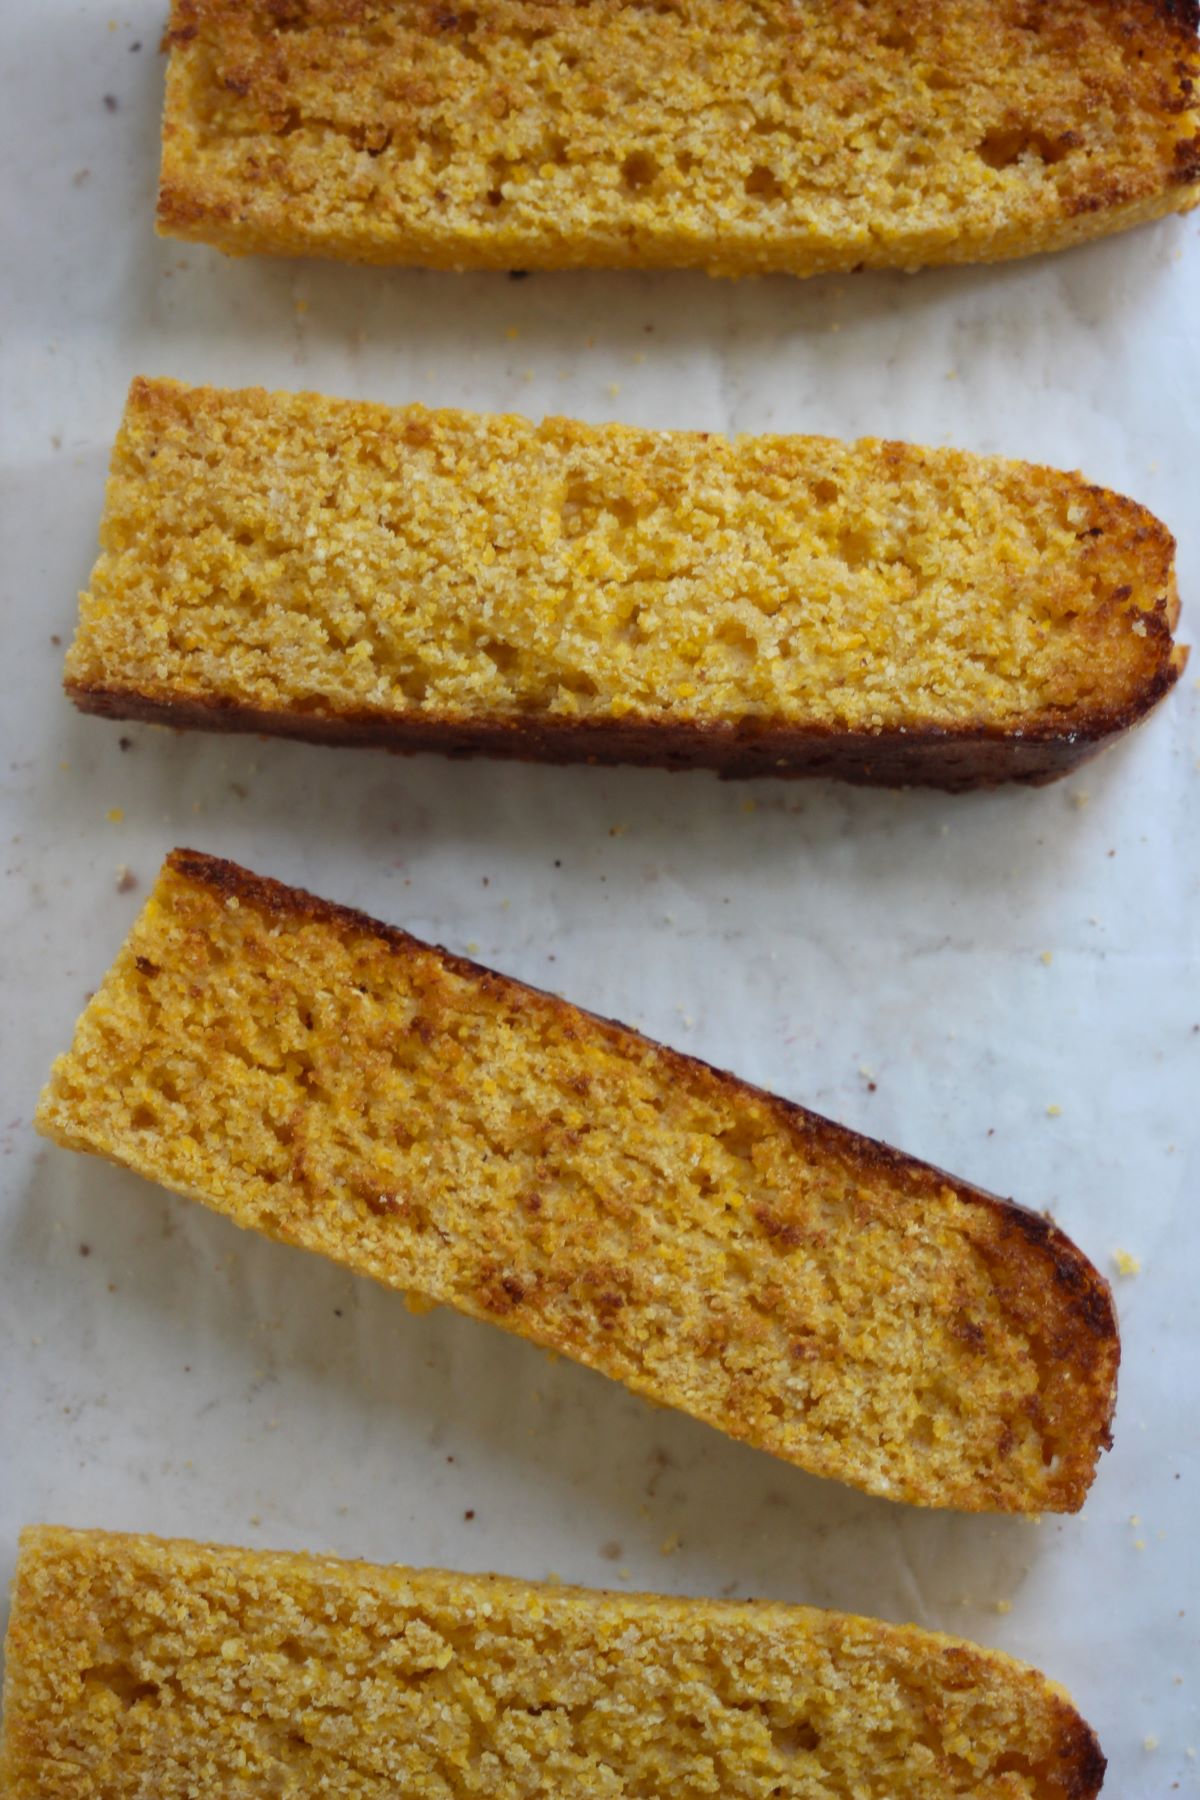 Slices of corn bread on a white surface seen from above.